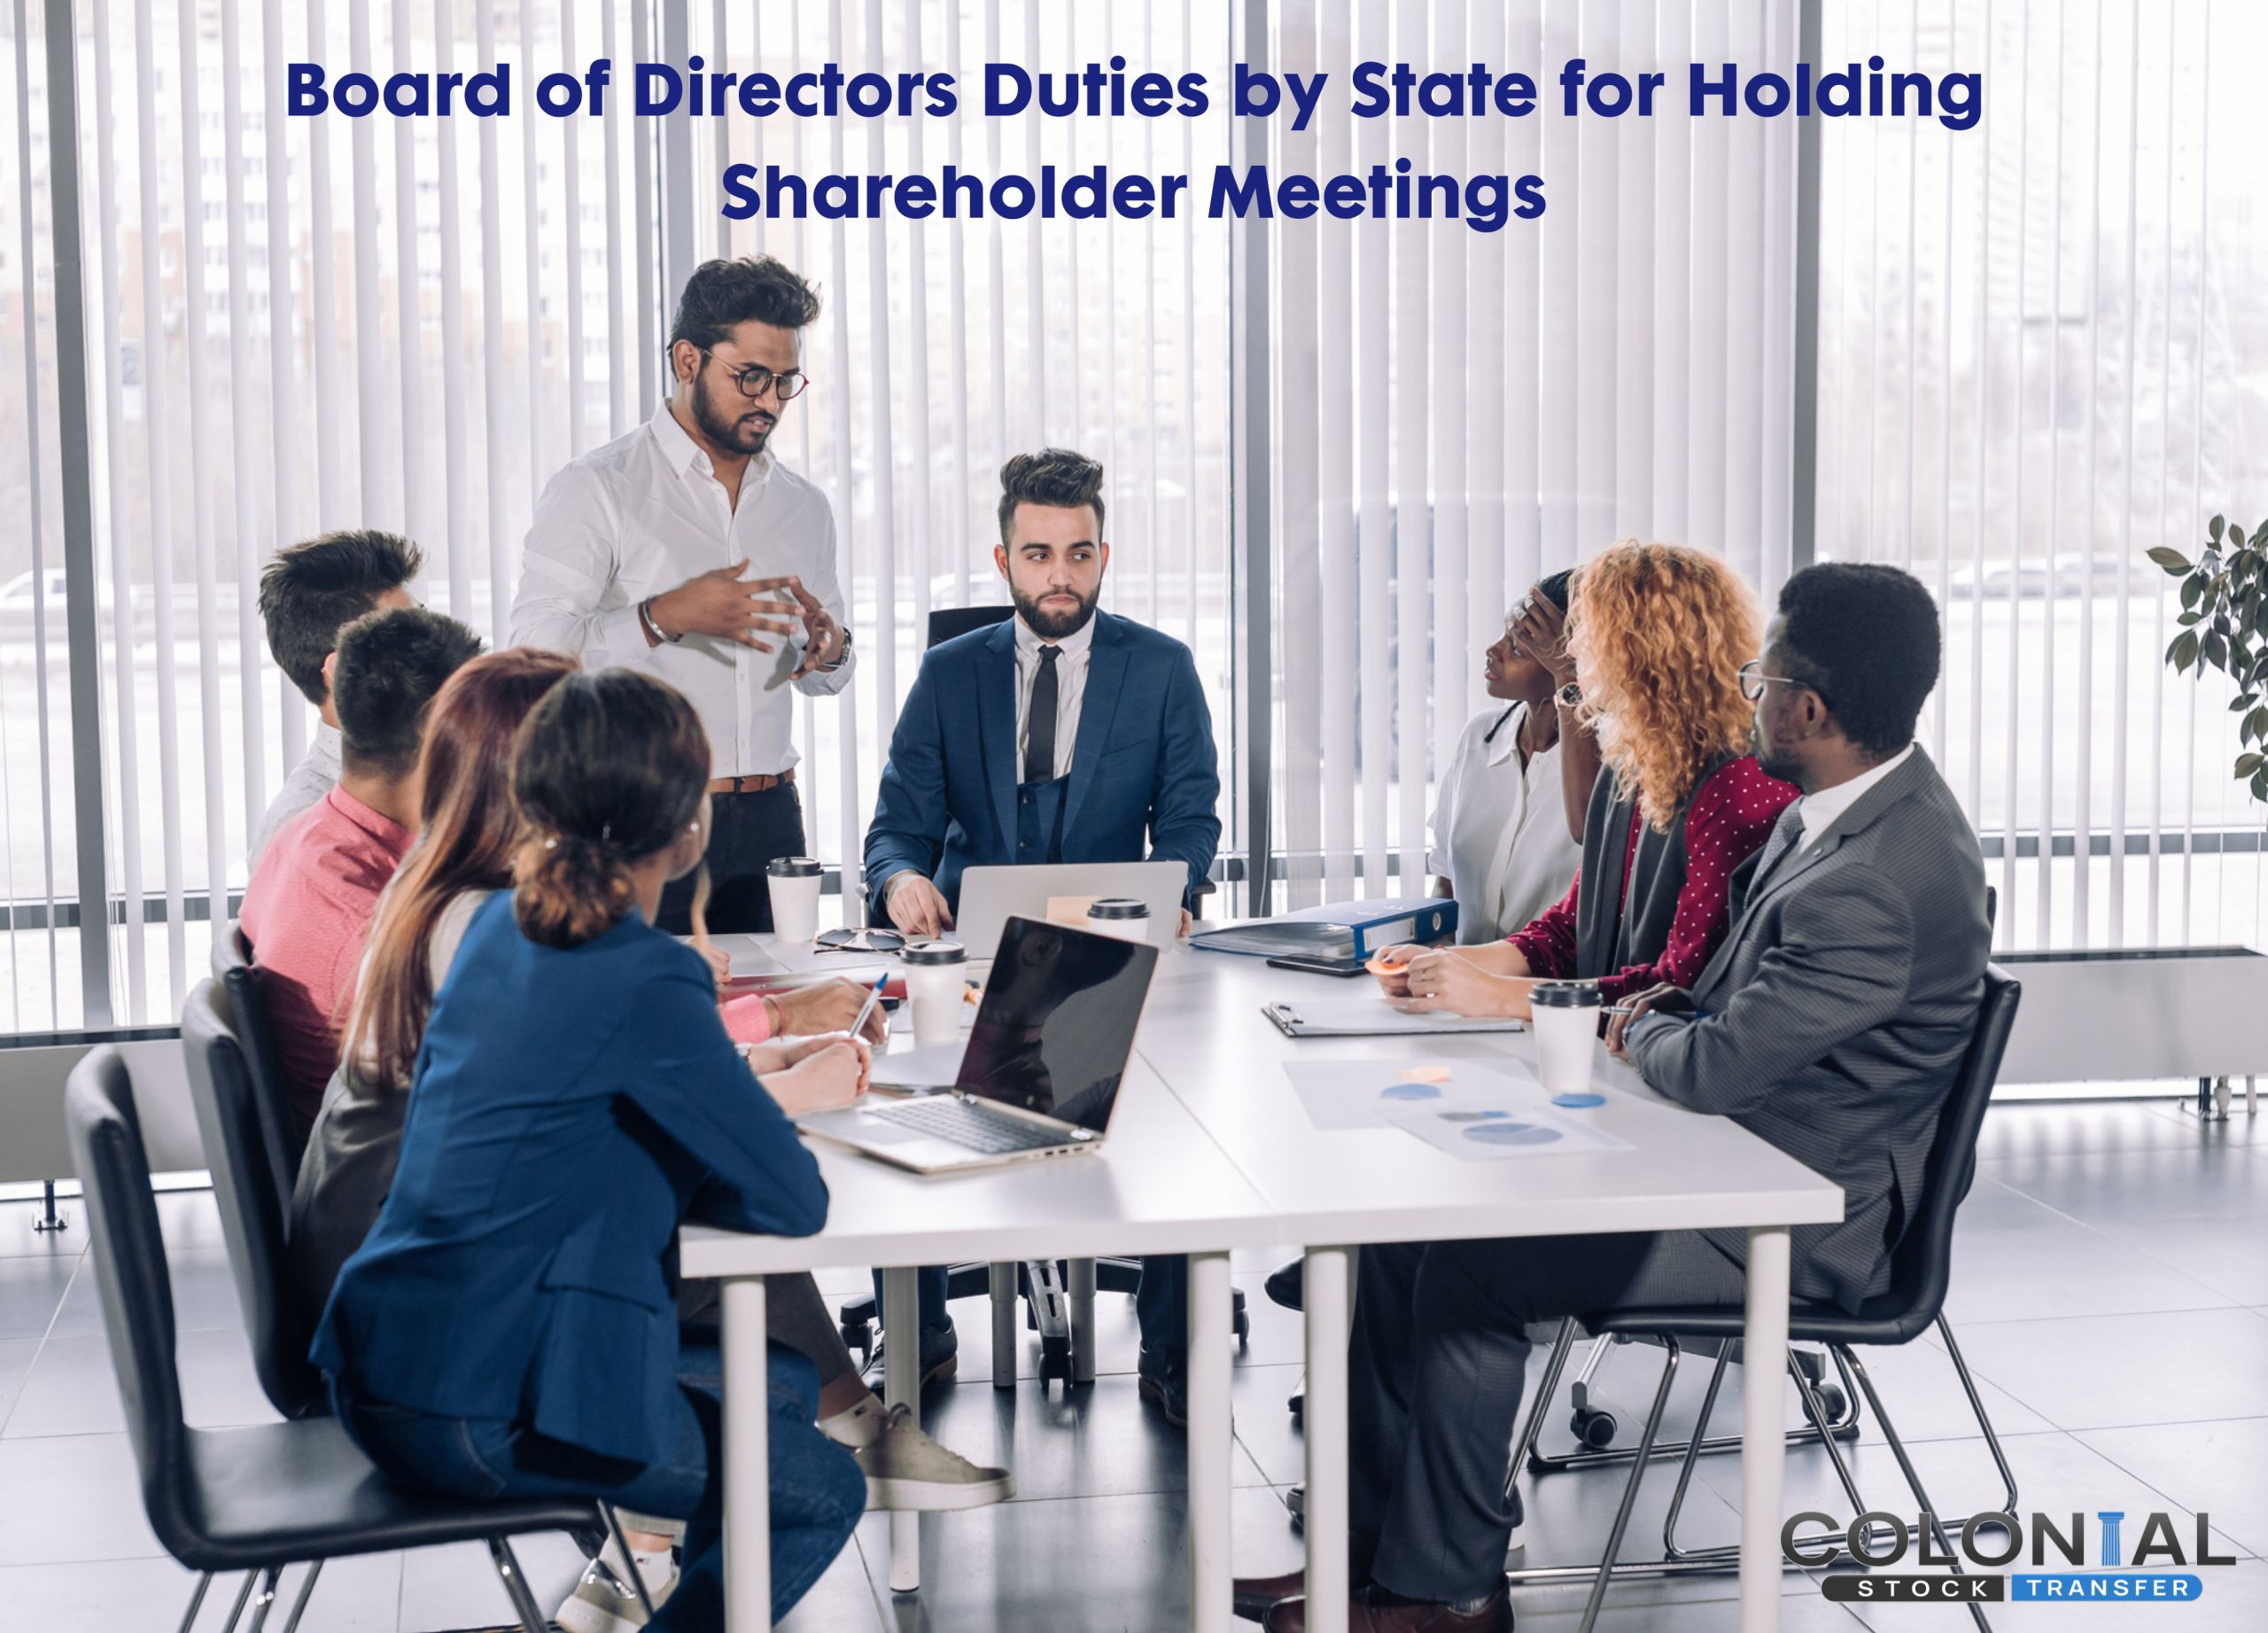 Board of Directors Duties by State for Holding Shareholder Meetings